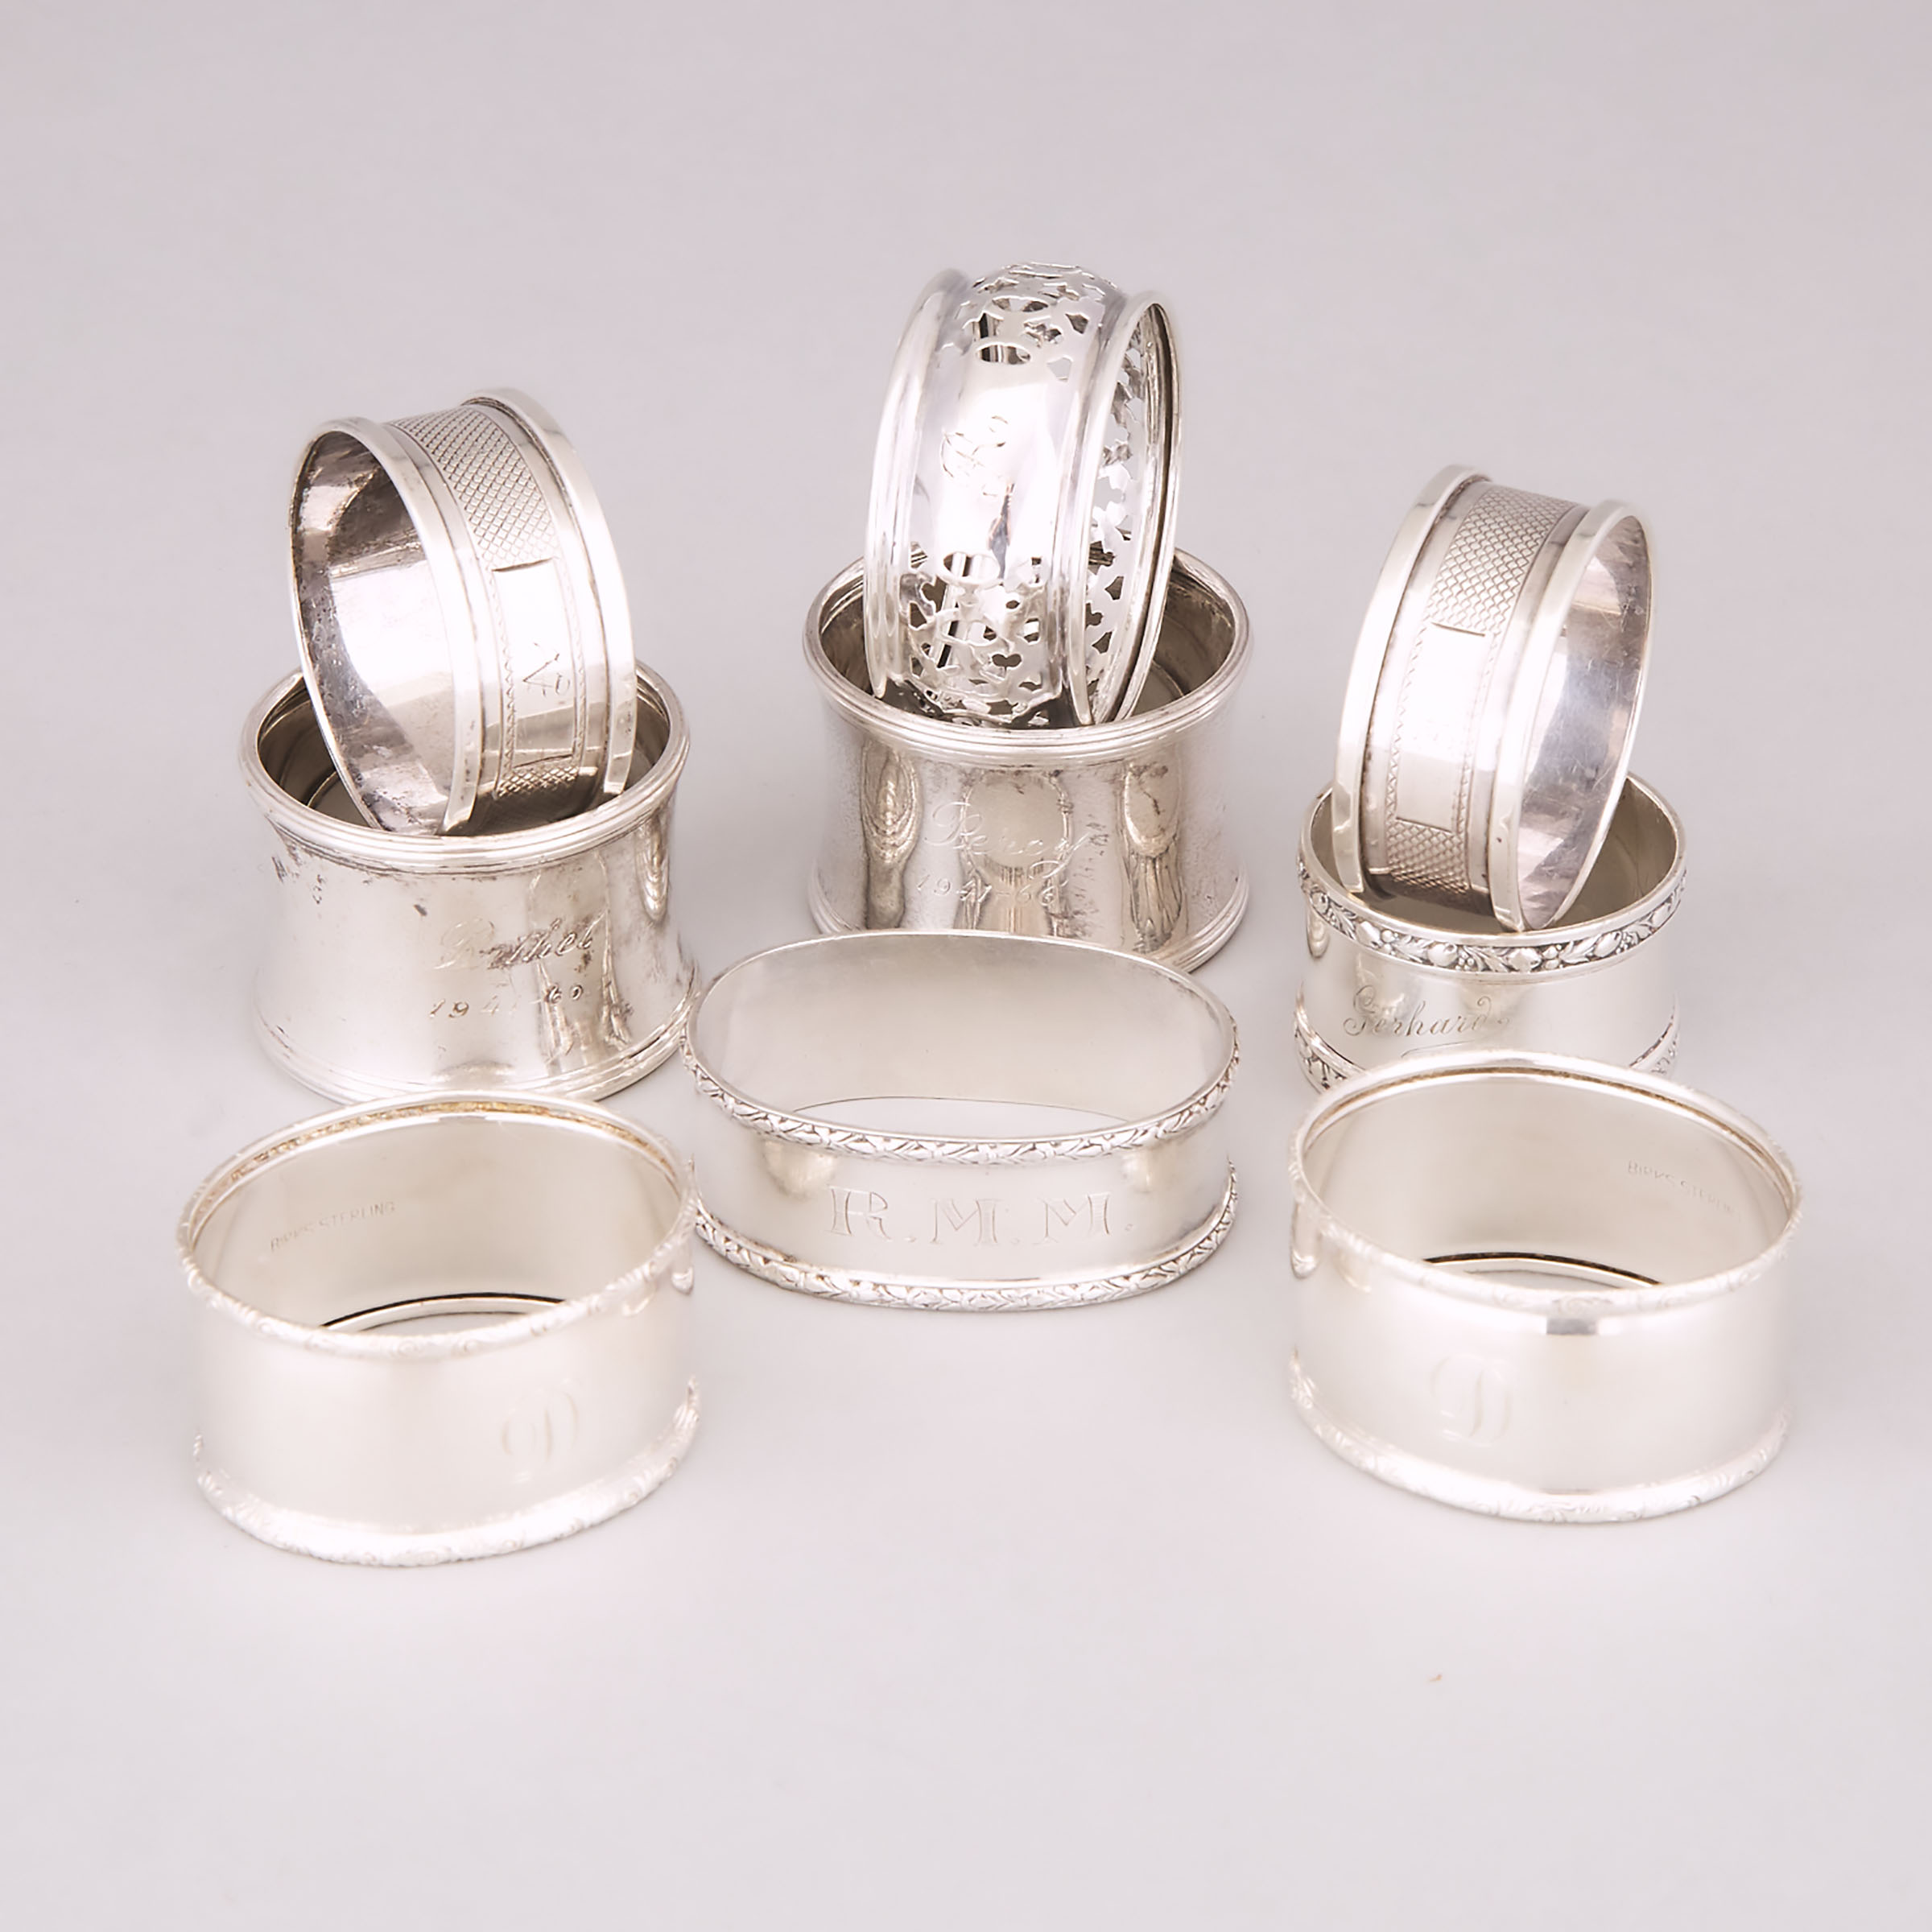 Group of Nine Canadian, English, and German Silver Napkin Rings, 20th century